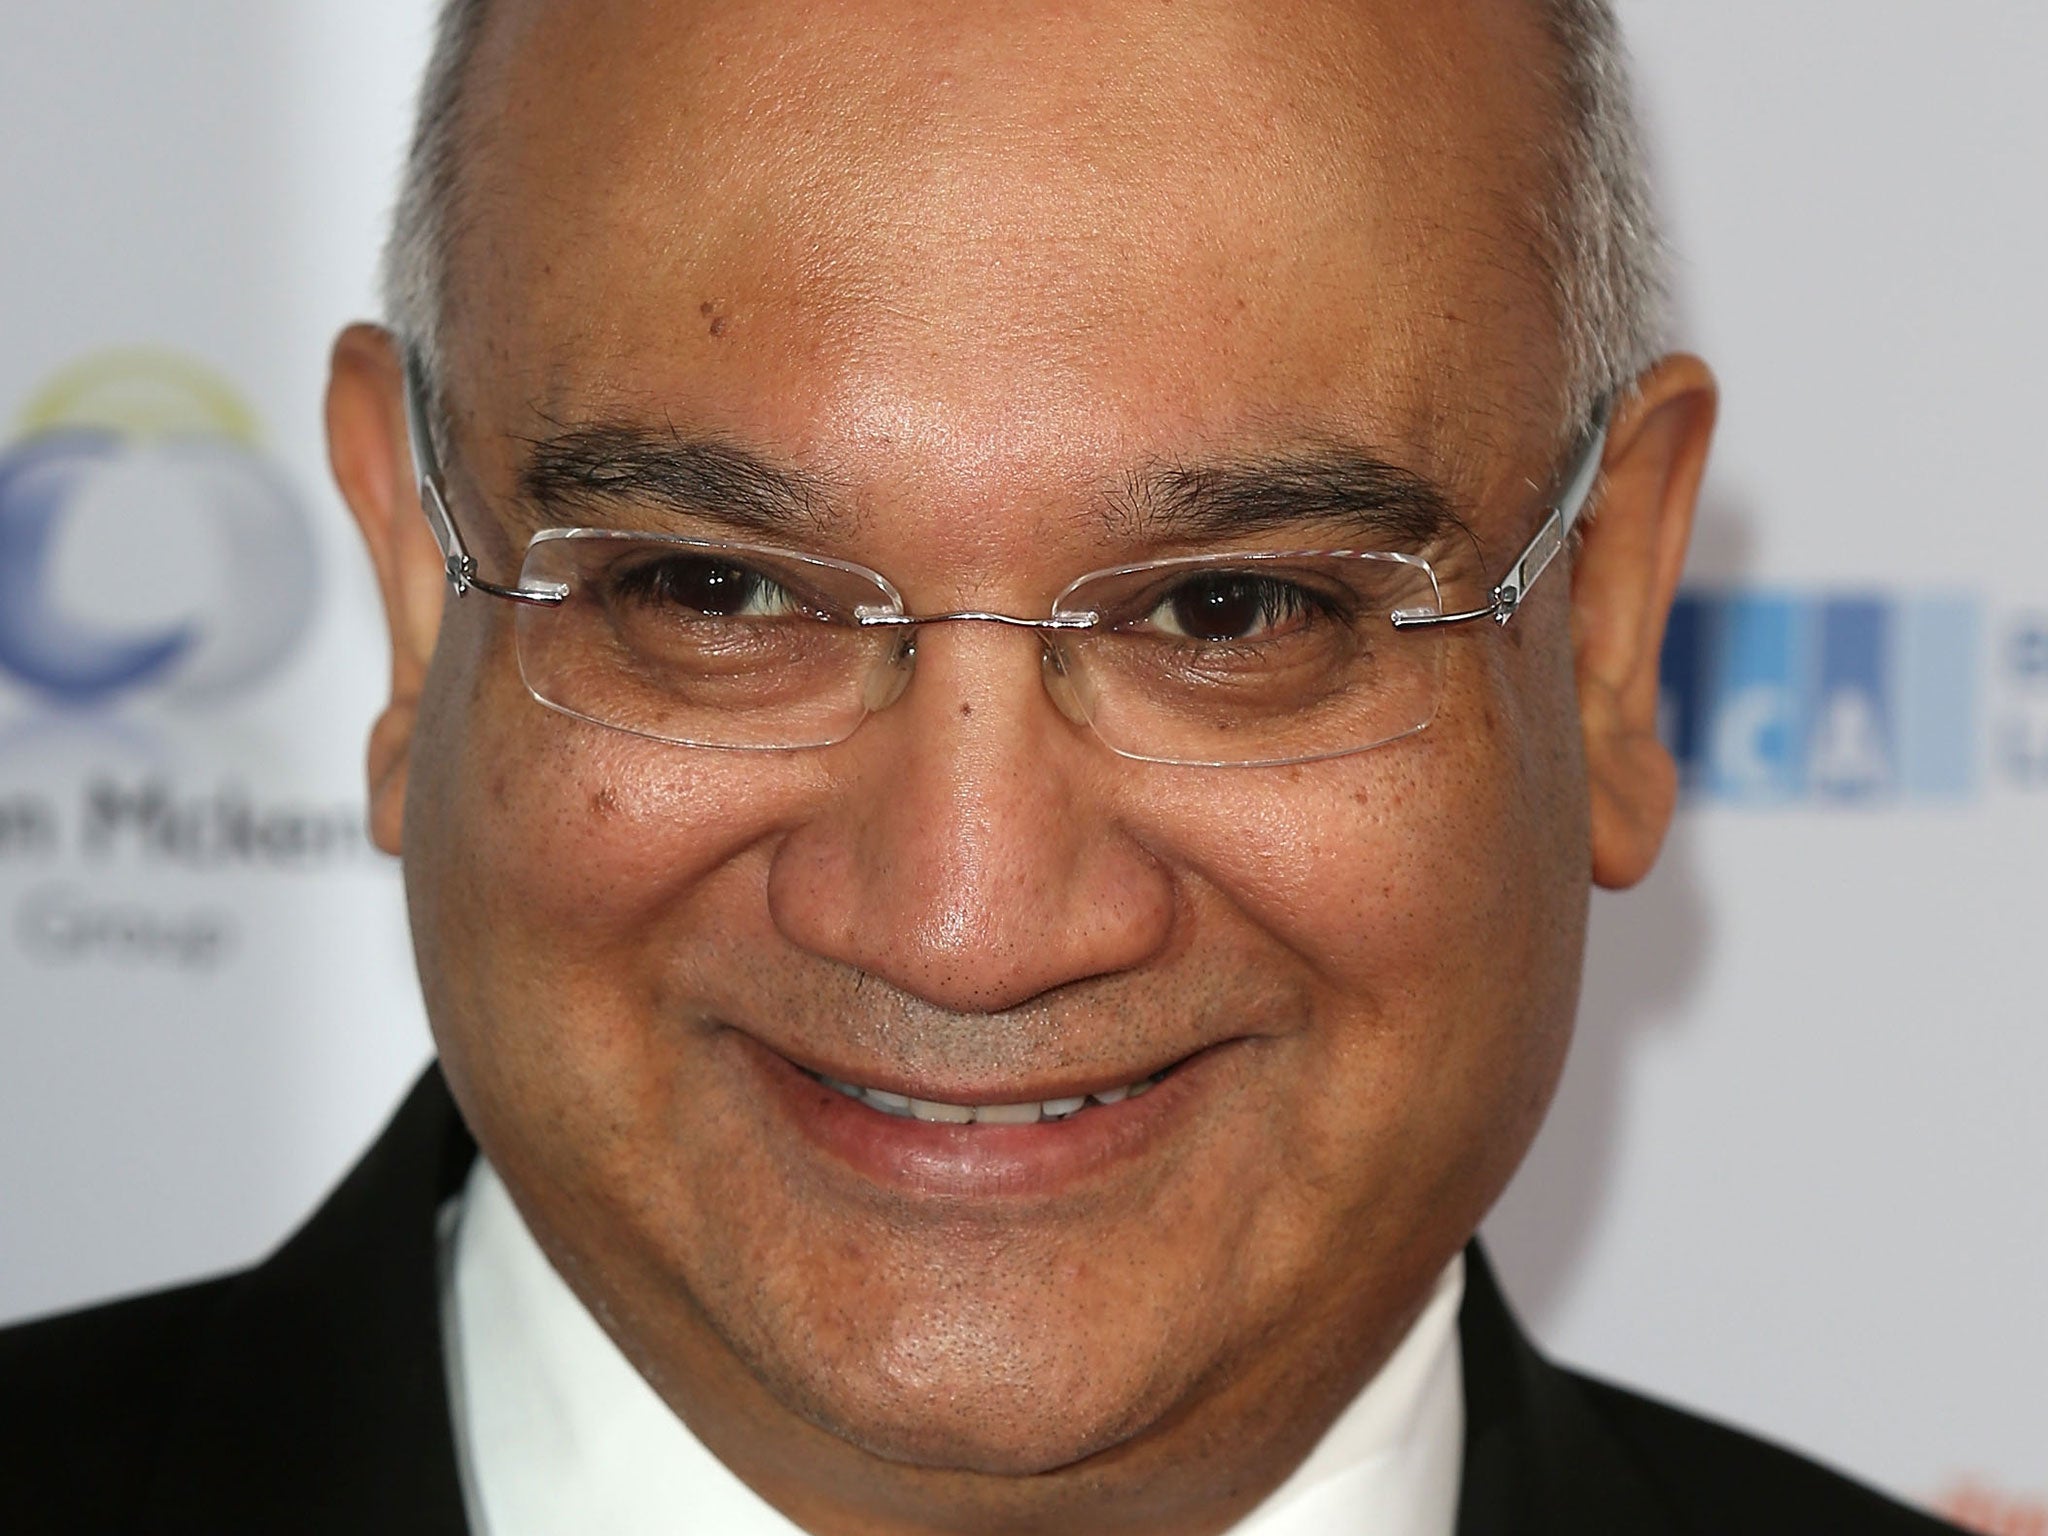 Home Affairs Committee chairman Keith Vaz received an apology from the Home Office